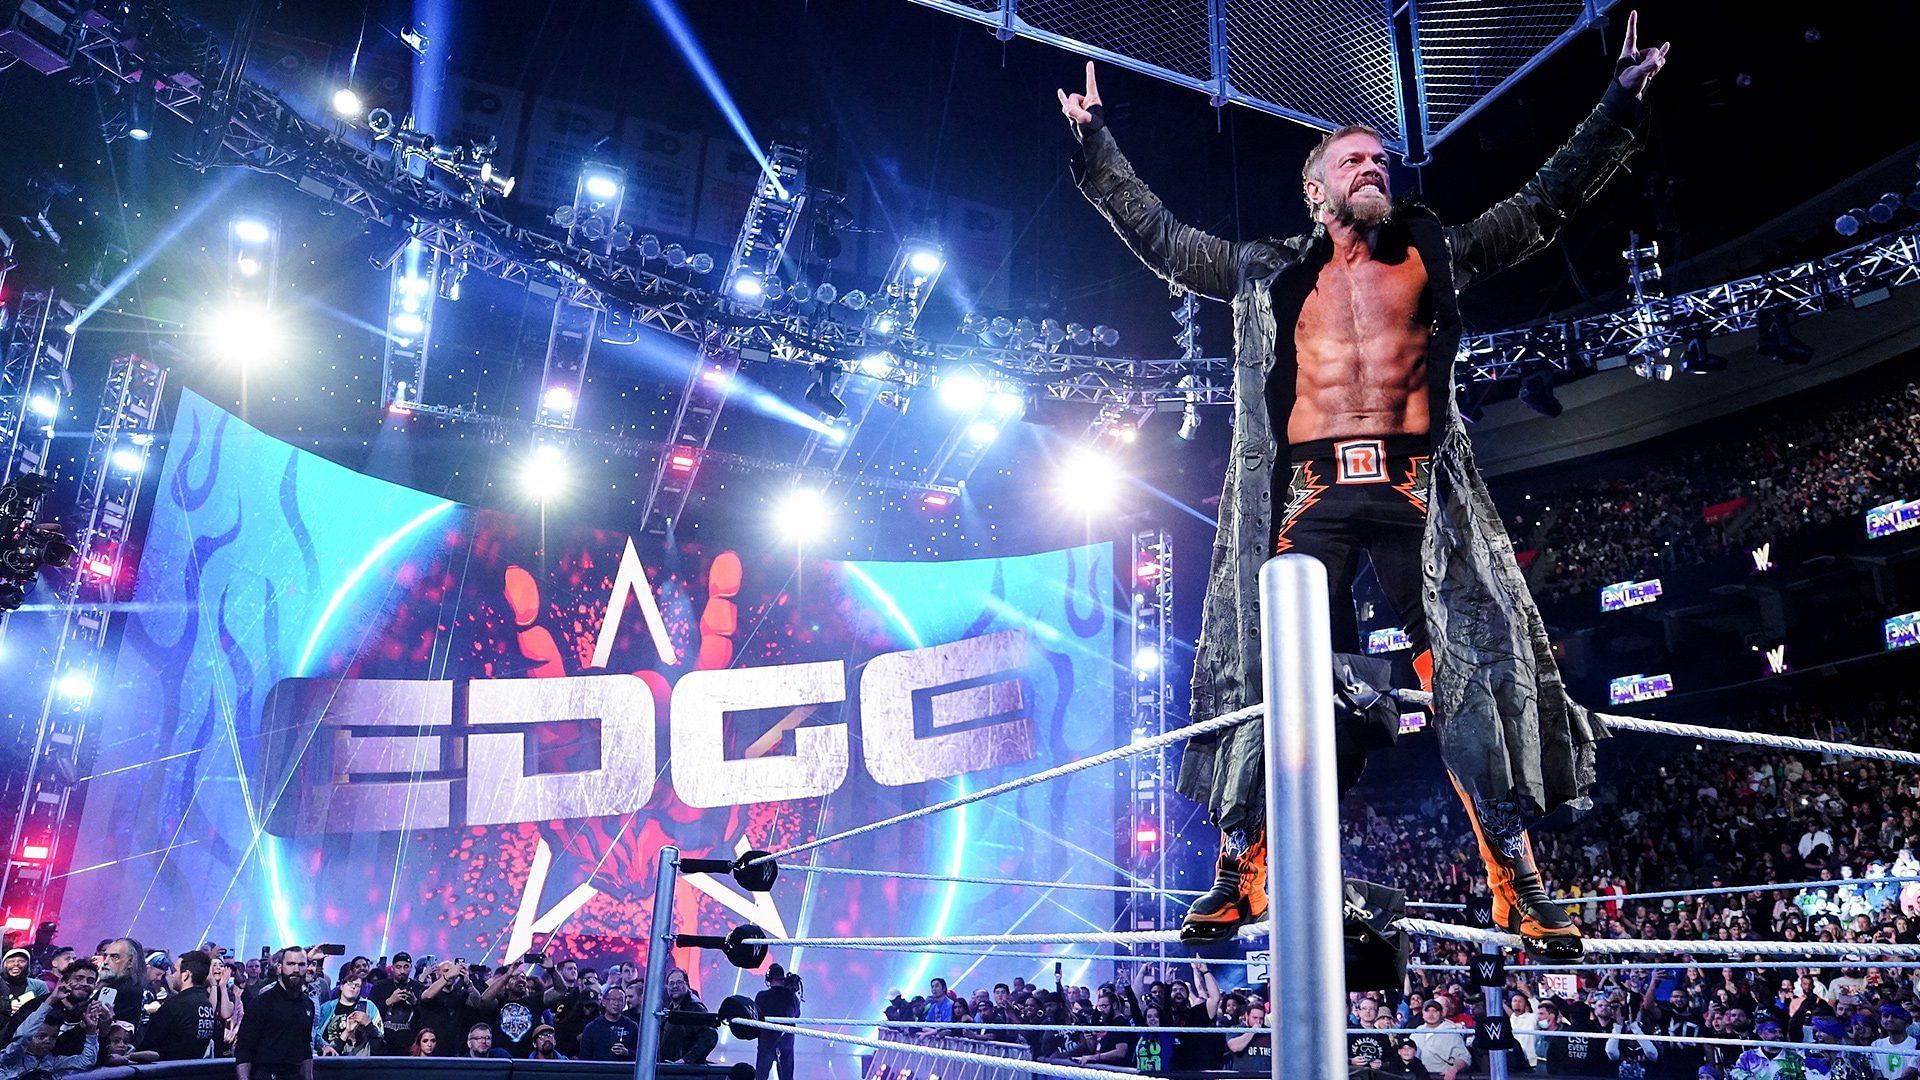 Edge at Extreme Rules